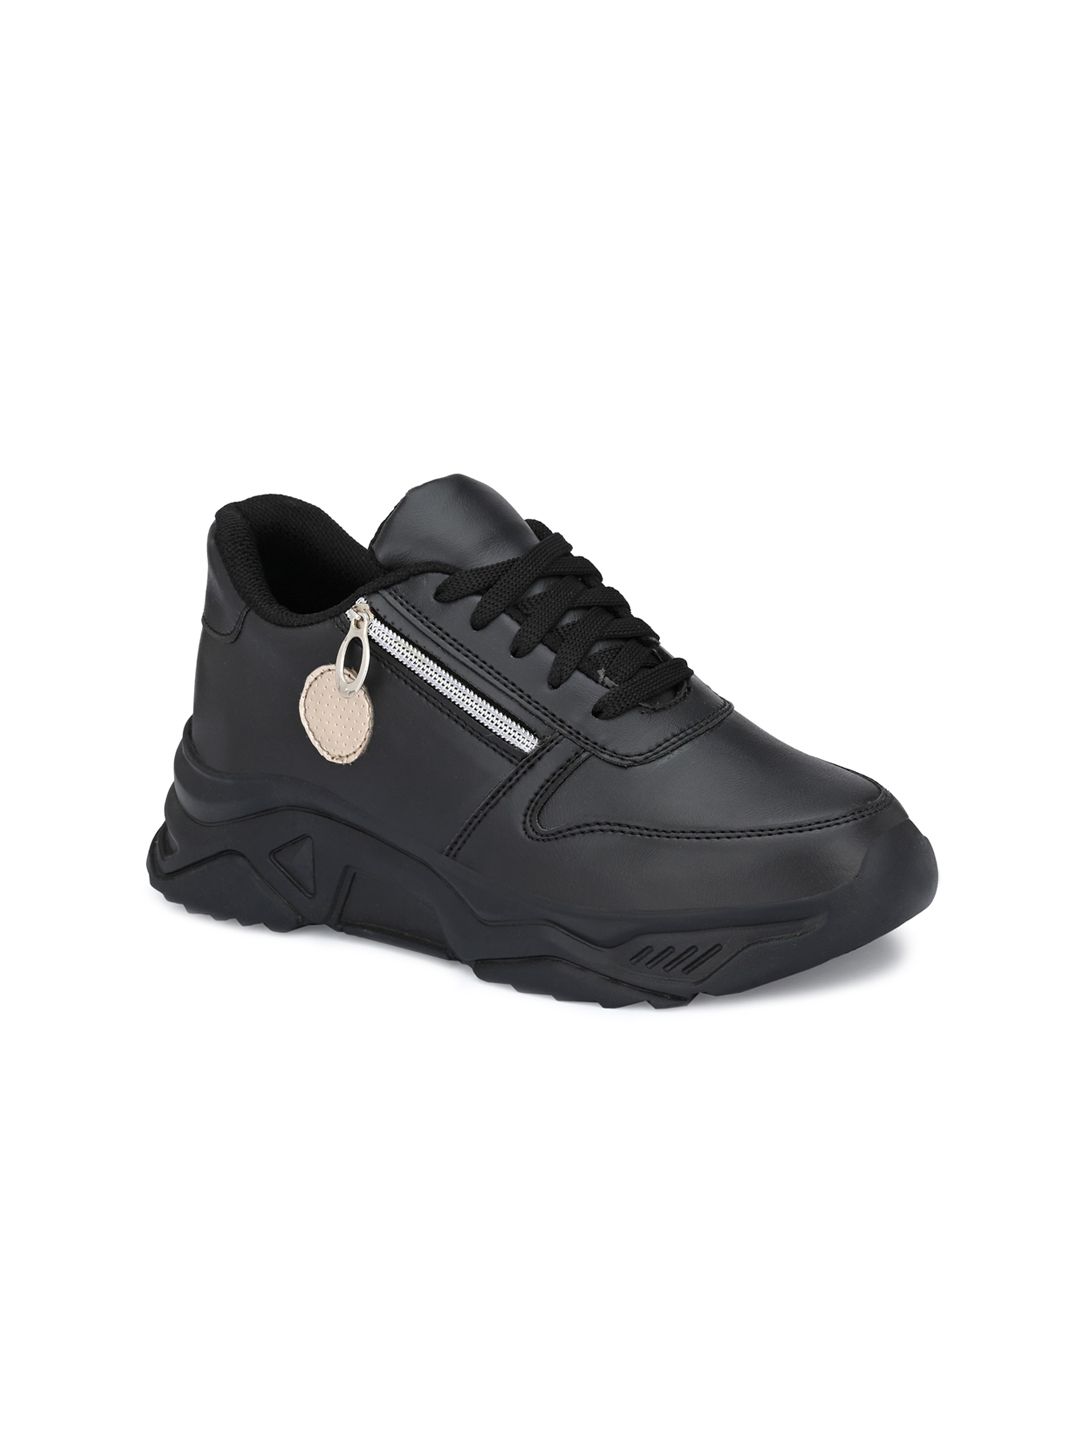 HERE&NOW Women Black Sneakers Price in India